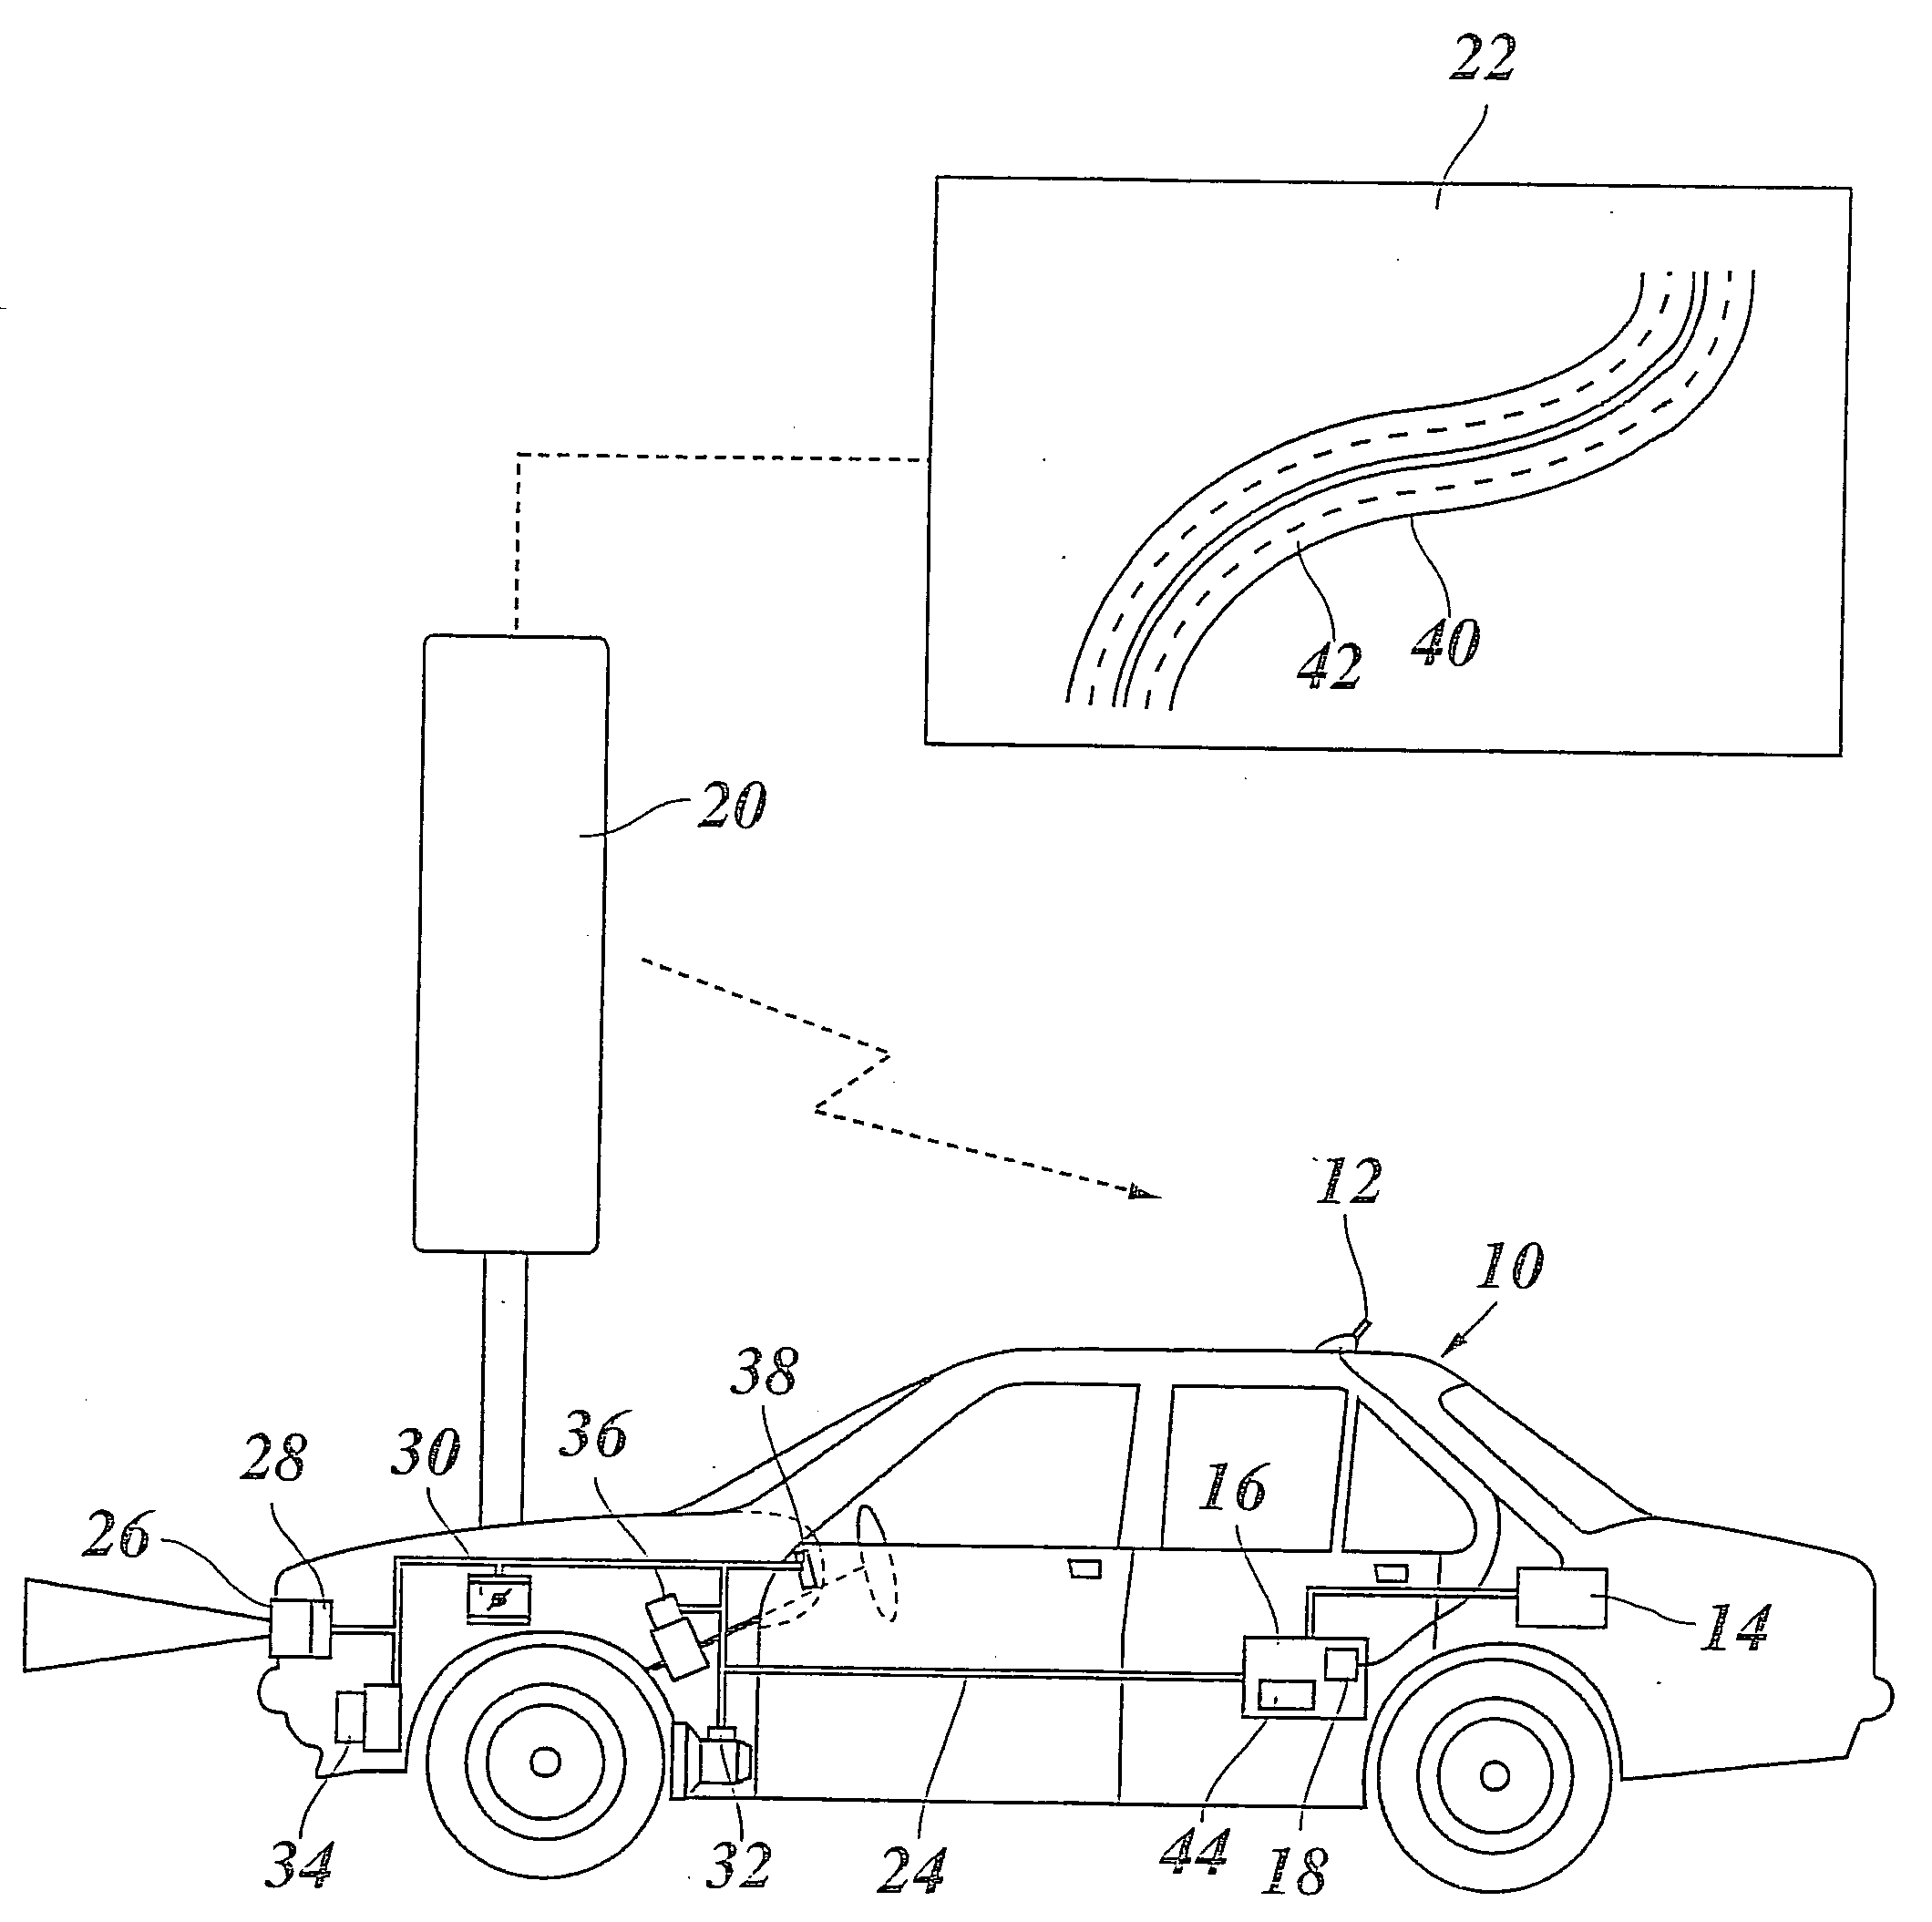 Automatic vehicle guidance method and system